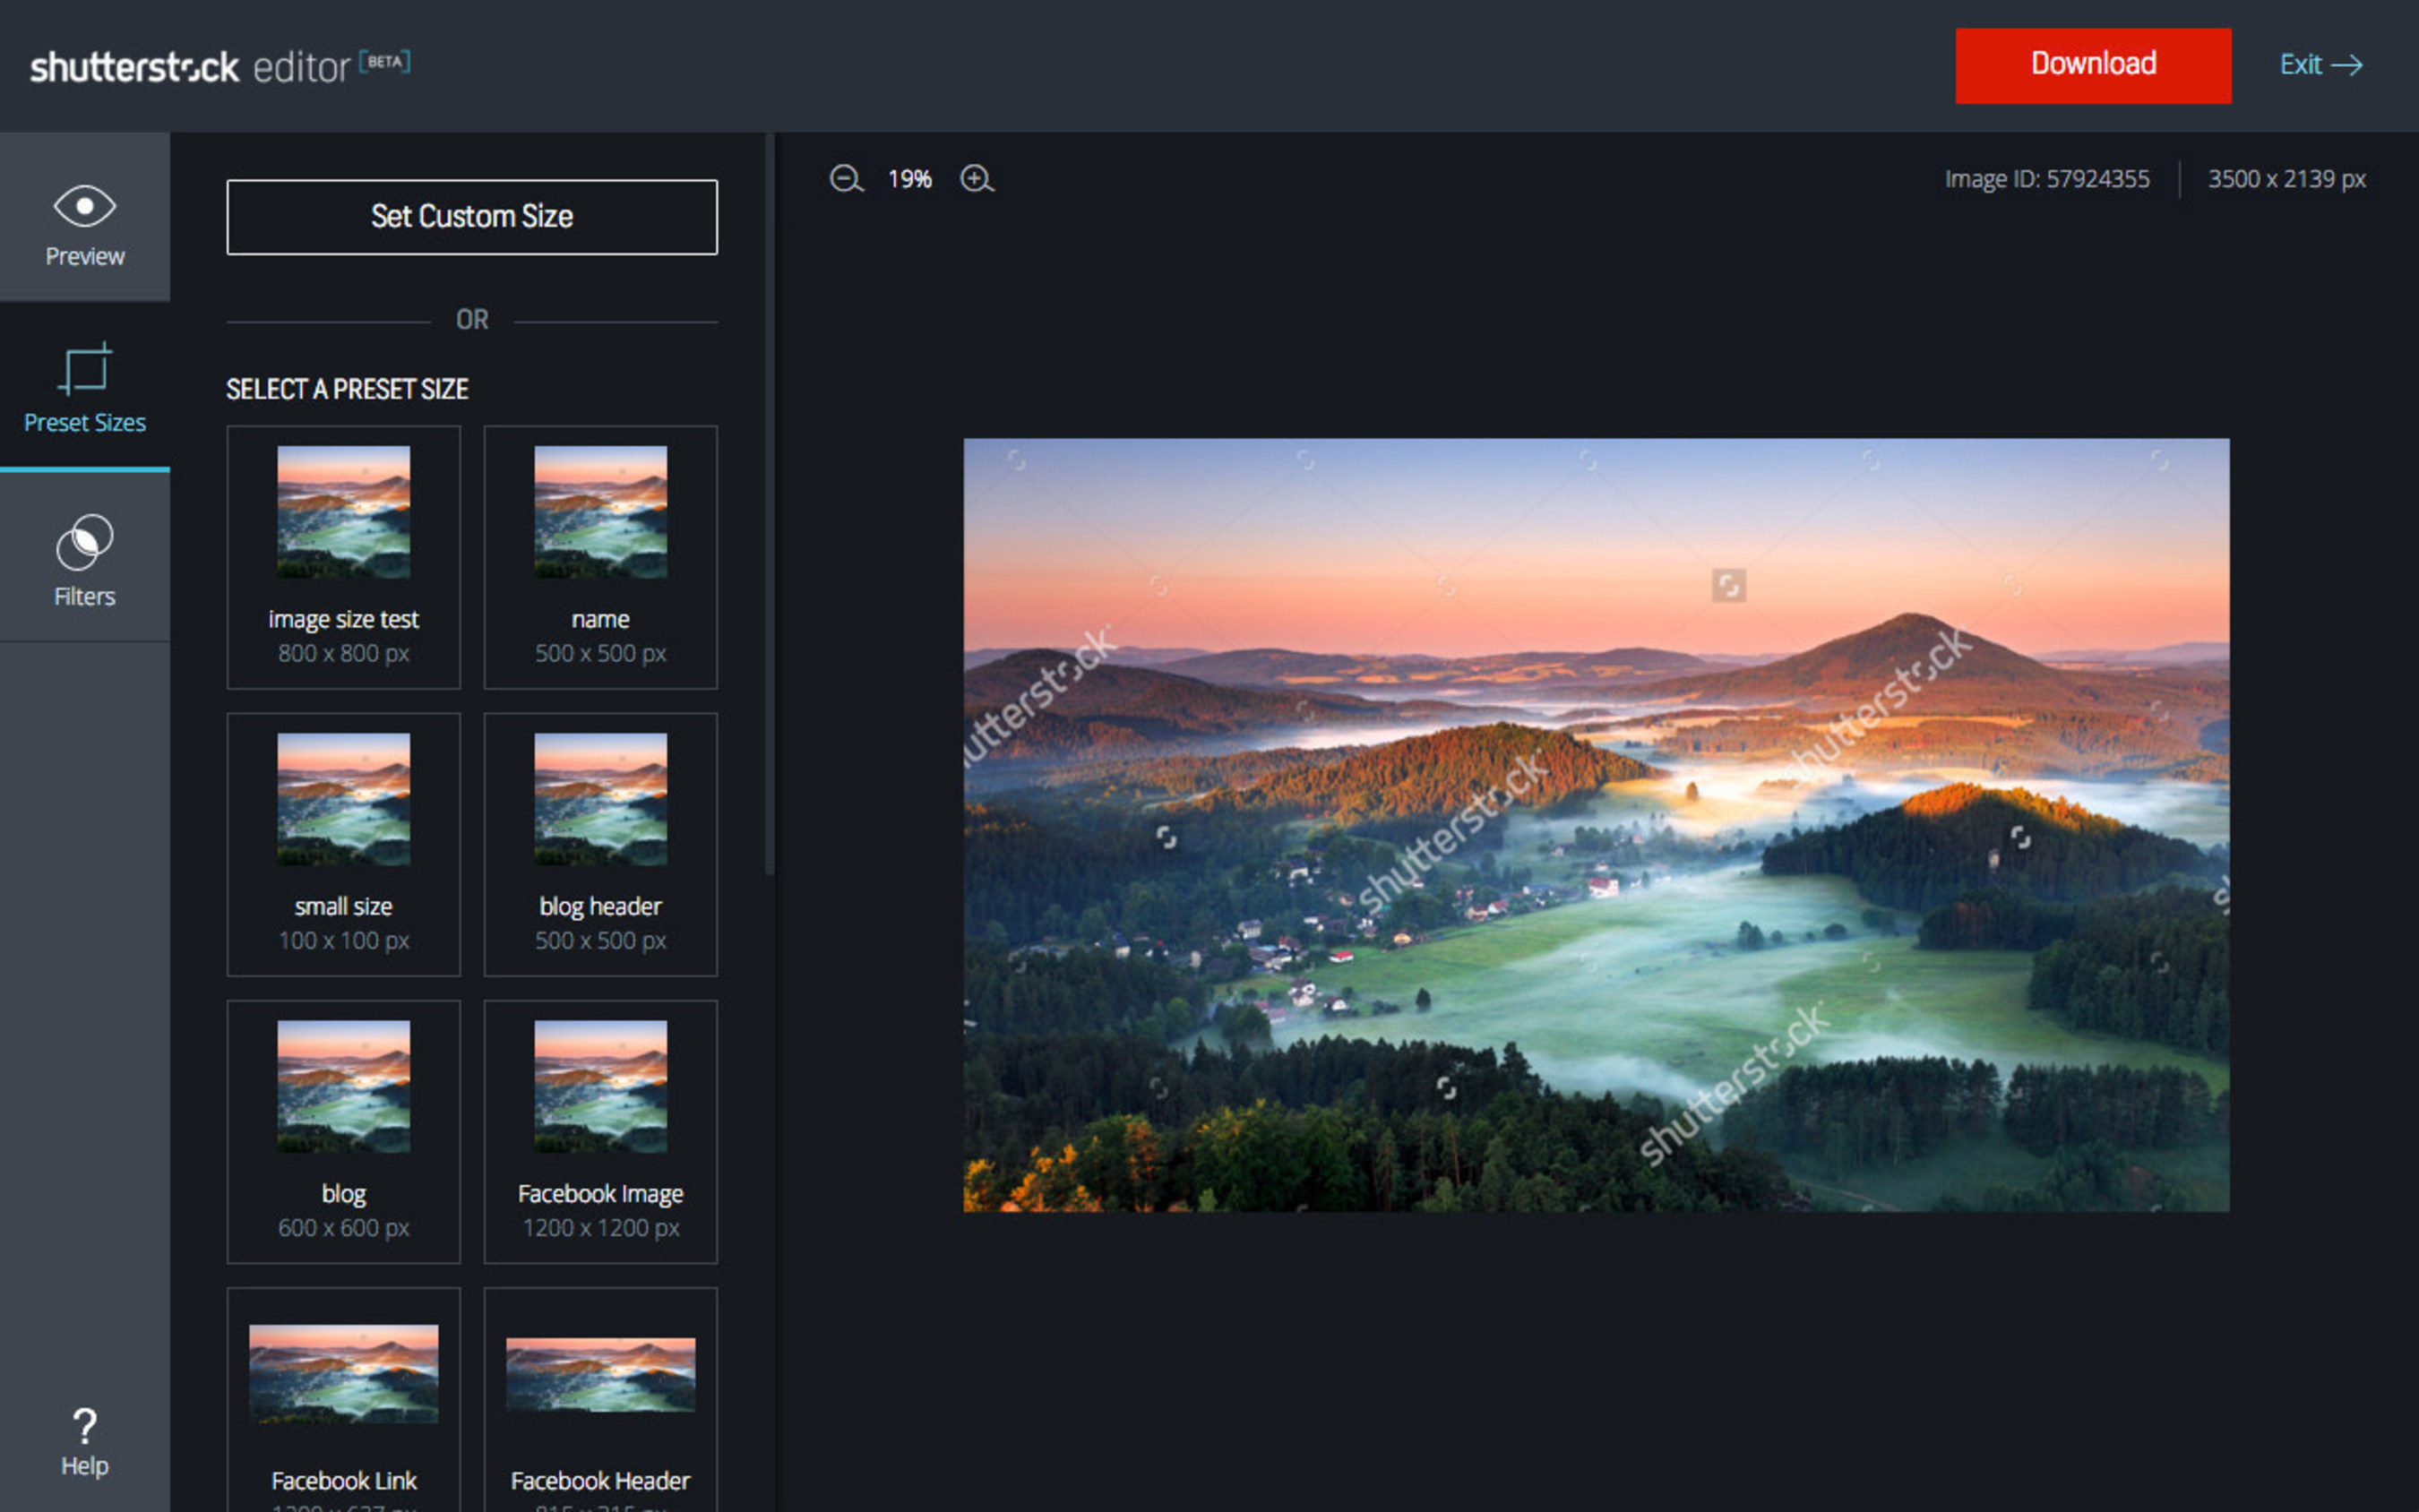 Introducing Shutterstock Editor: A Simple and Fast Way to Edit Photos